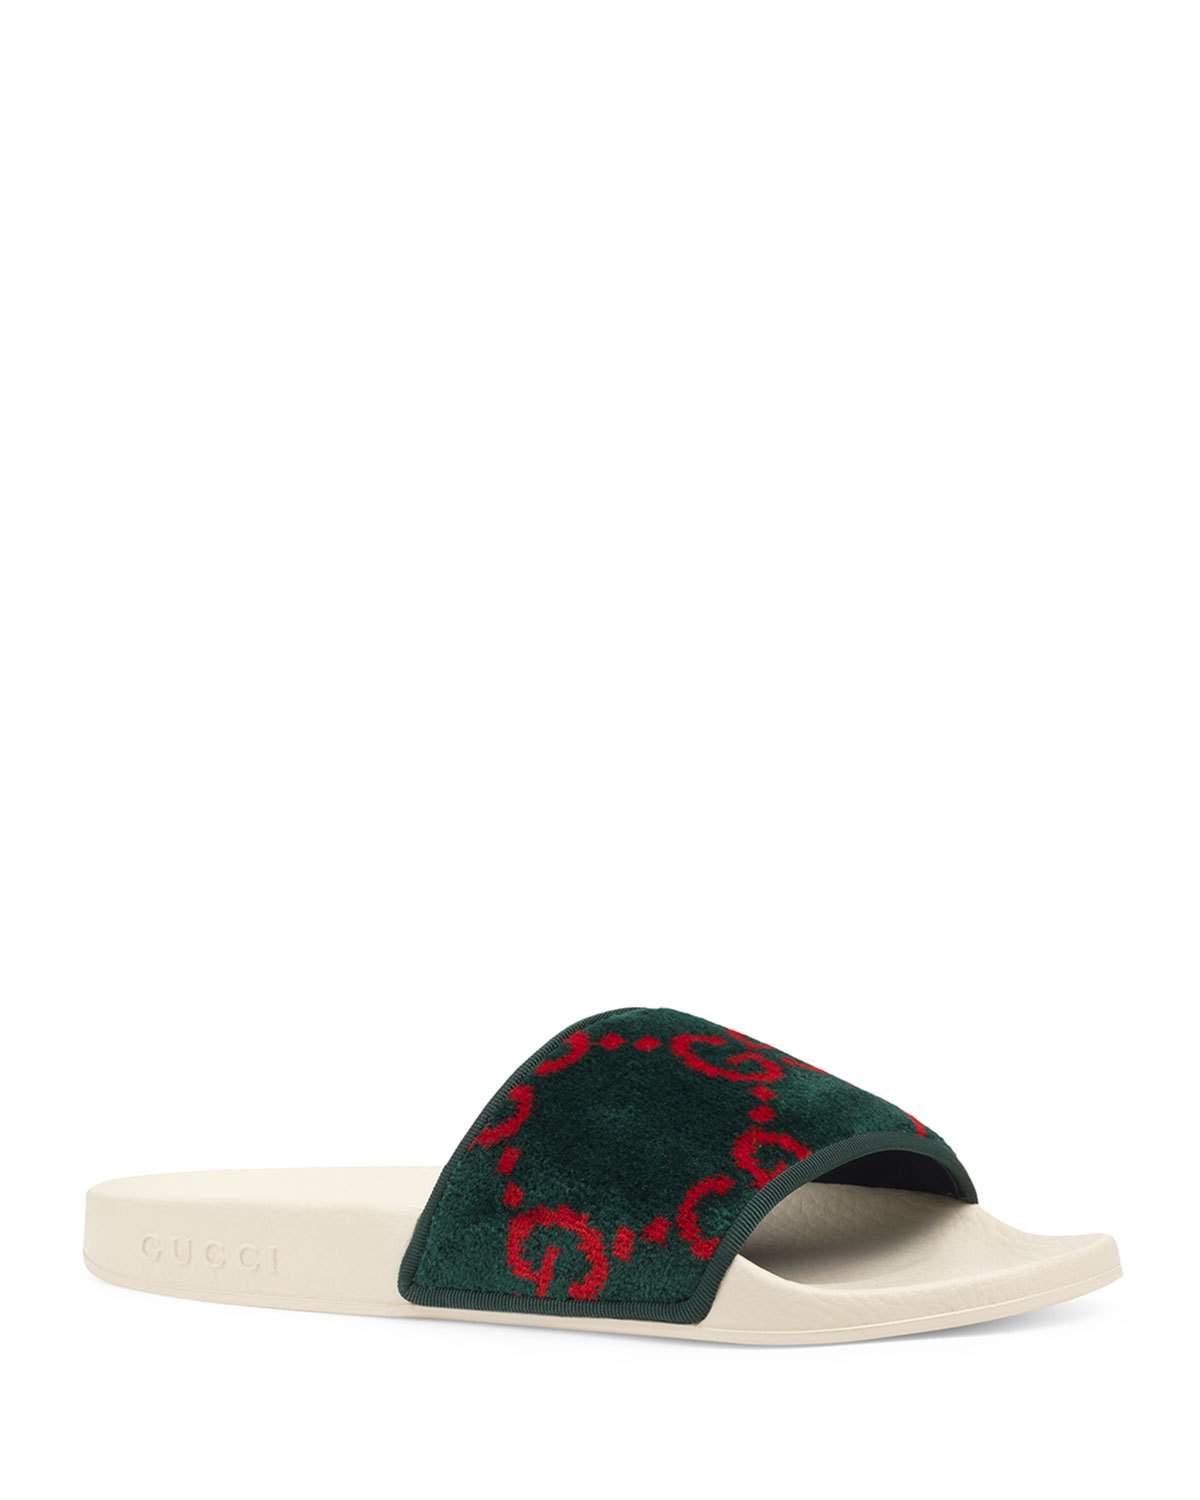 Gucci Pursuit Terry Cloth  Logo Pool Slide  Sandals  in Green 